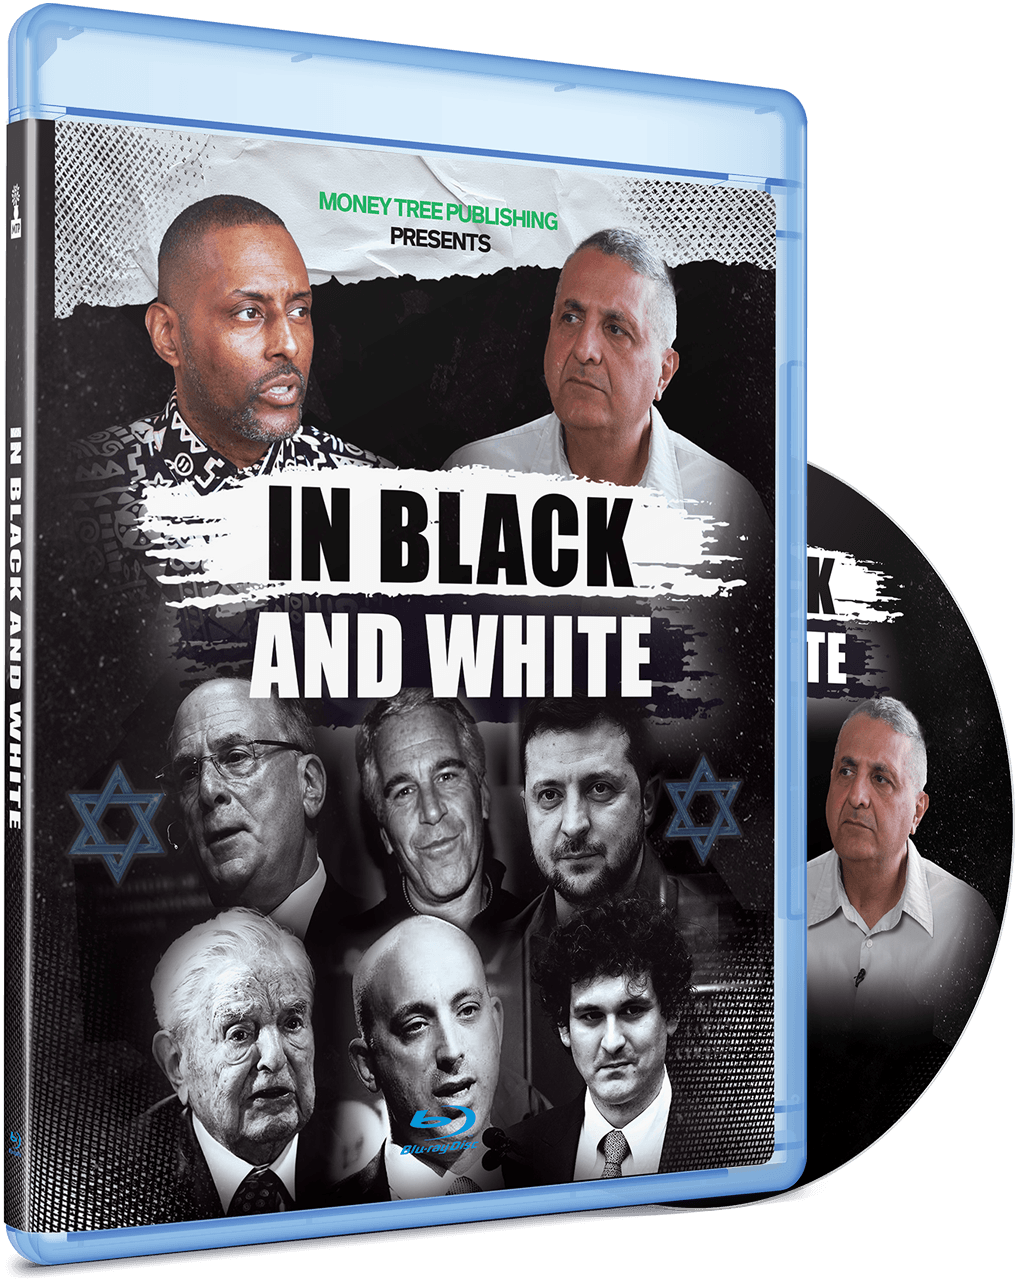 In Black and White Documentary Series in Blu-Ray Disc (2-DVD Set w 8 Episodes)